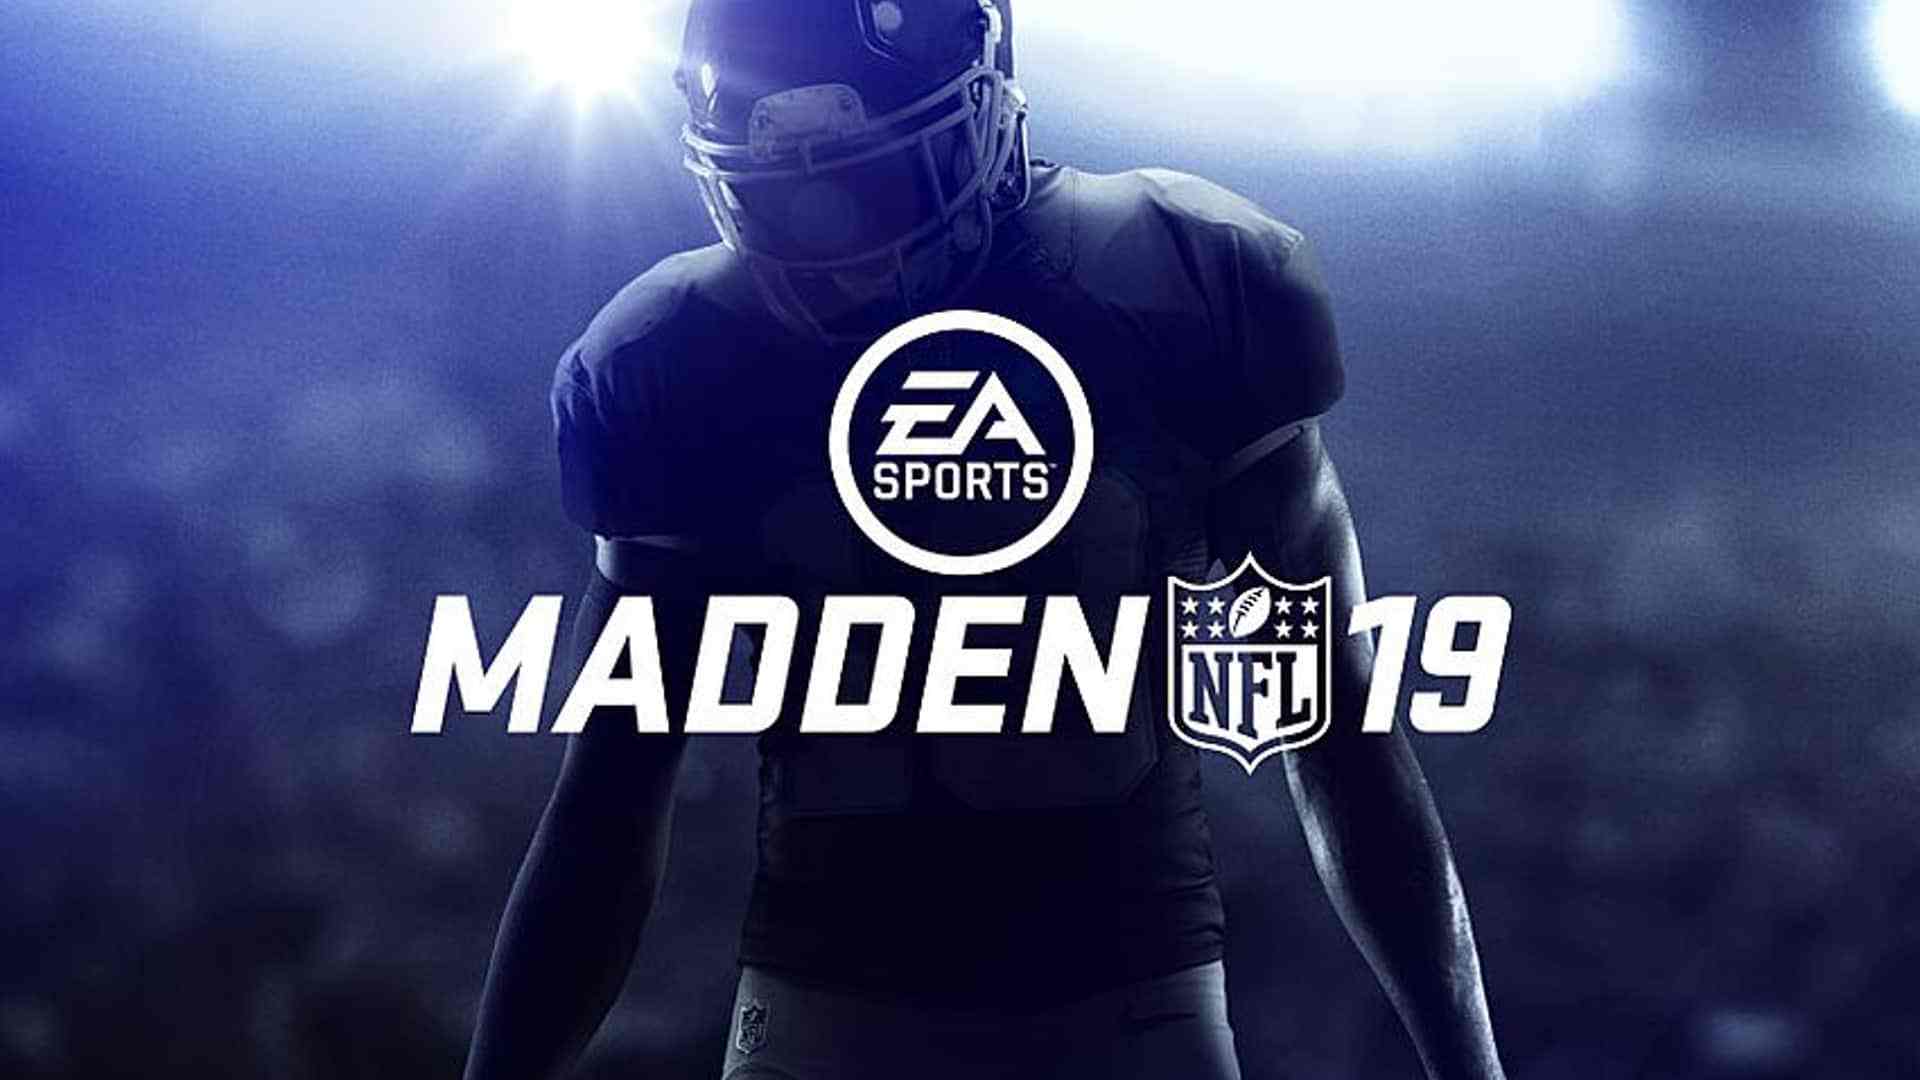 Madden NFL 19 will release on PC & is a part of Origins Access Premiere